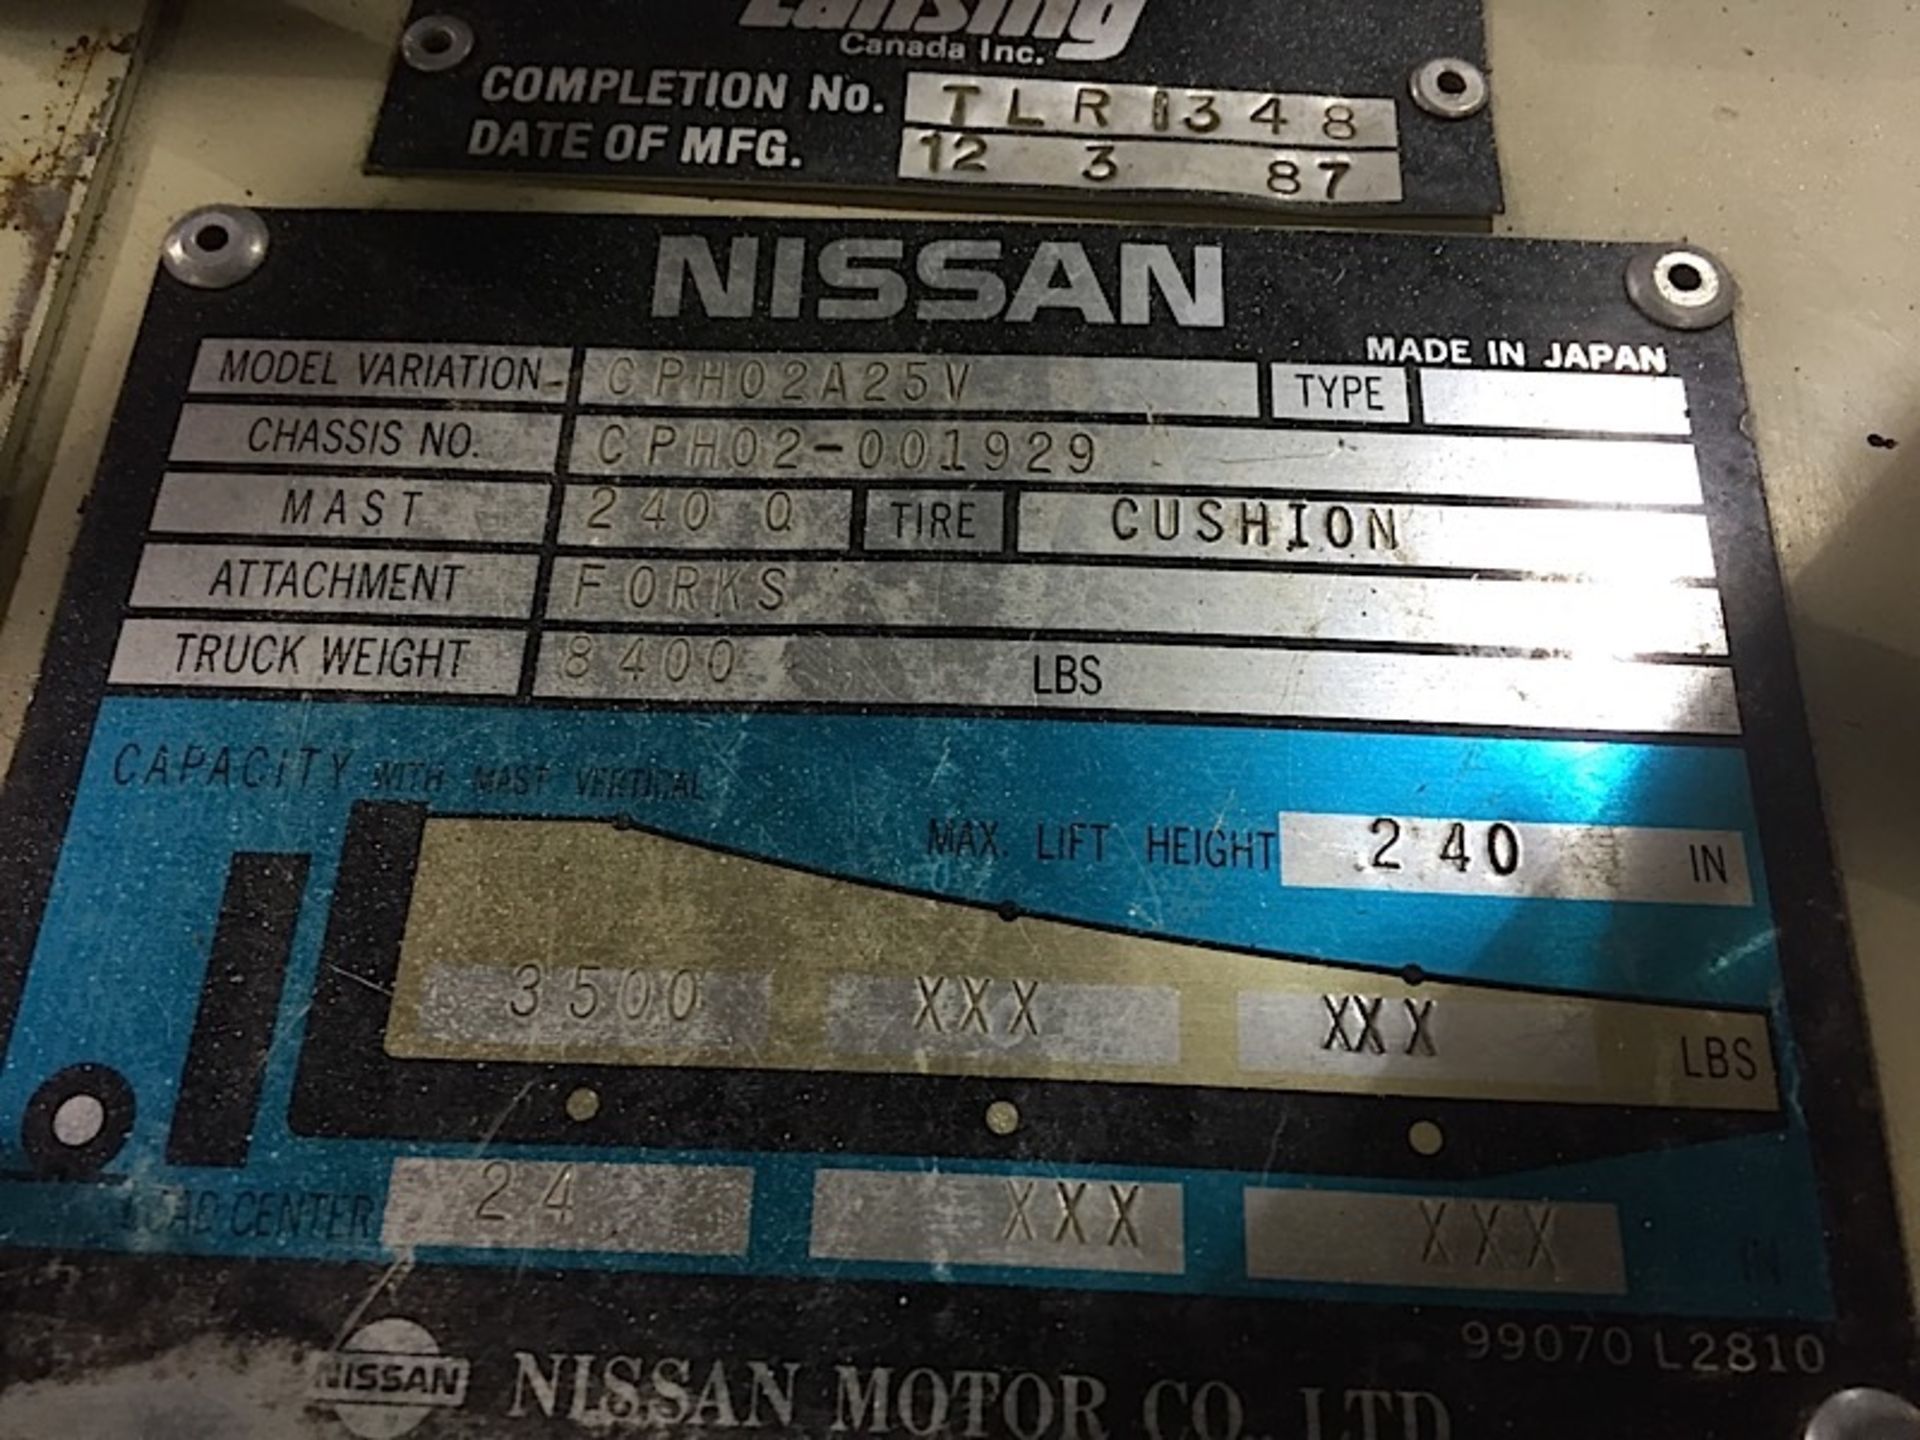 NISSAN (CPH02A25V) 3-STAGE, 5,000LBS. Cap. LPG FORKLIFT - Image 2 of 2